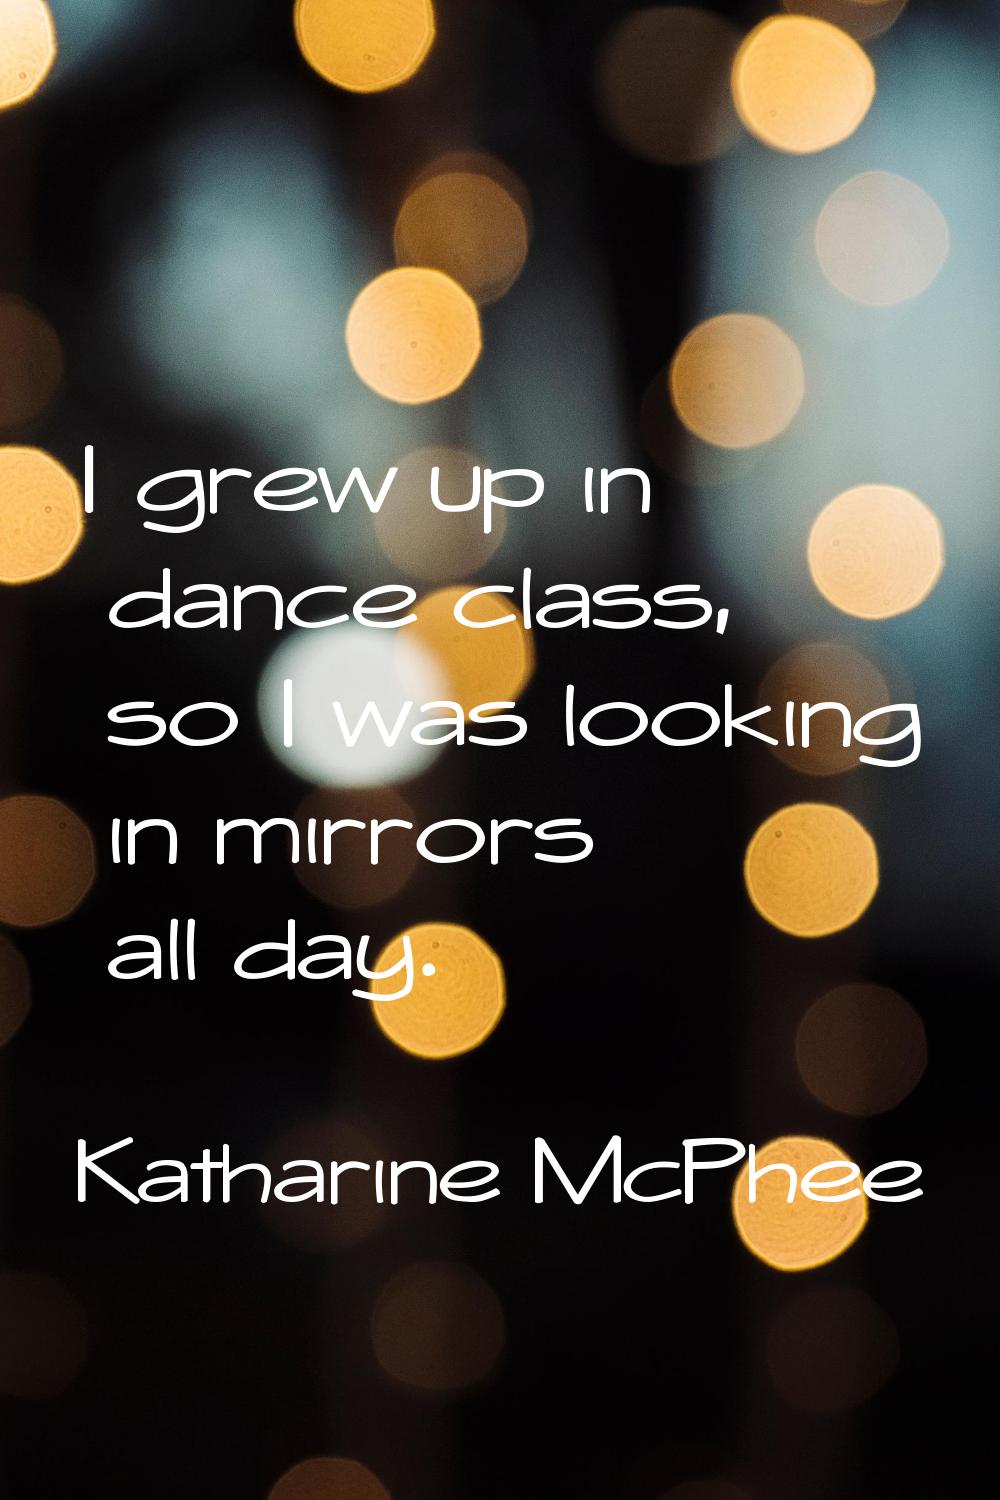 I grew up in dance class, so I was looking in mirrors all day.